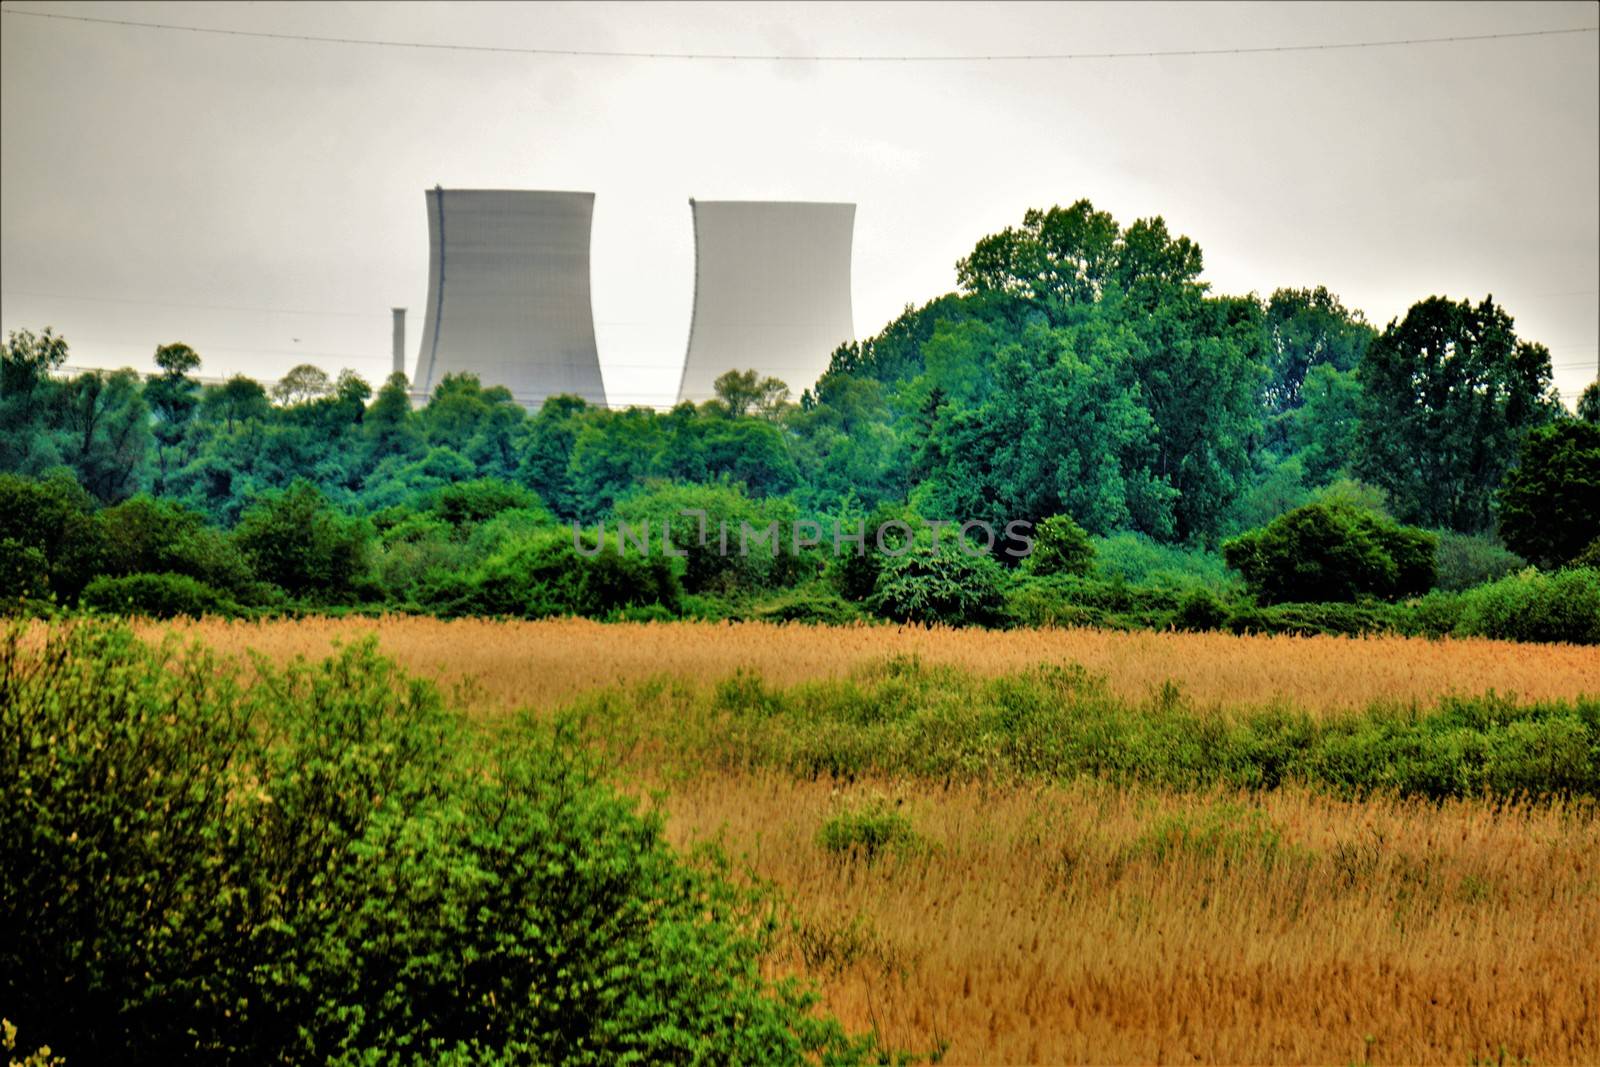 Nature reserve Wagbachniederung, Germany with nuclear plant